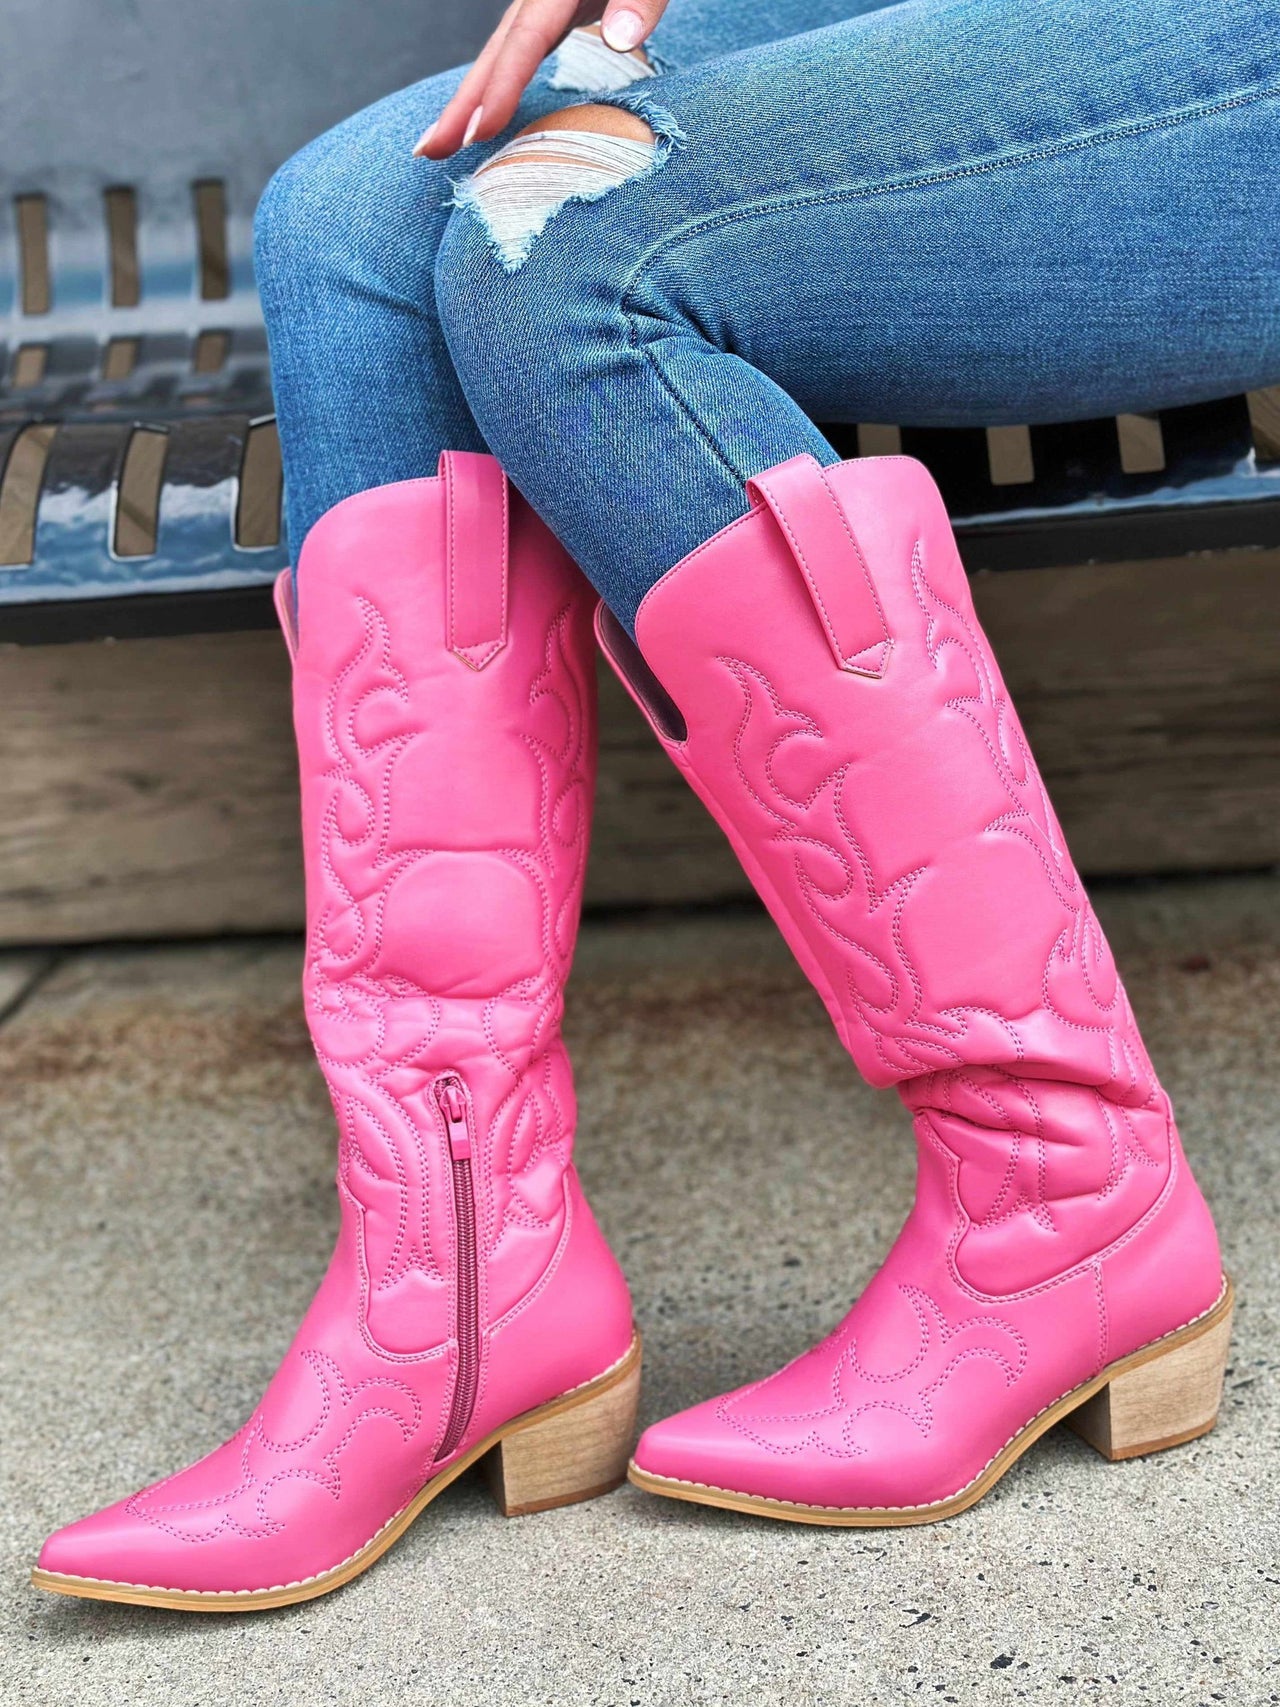 Barbie pink western boots.